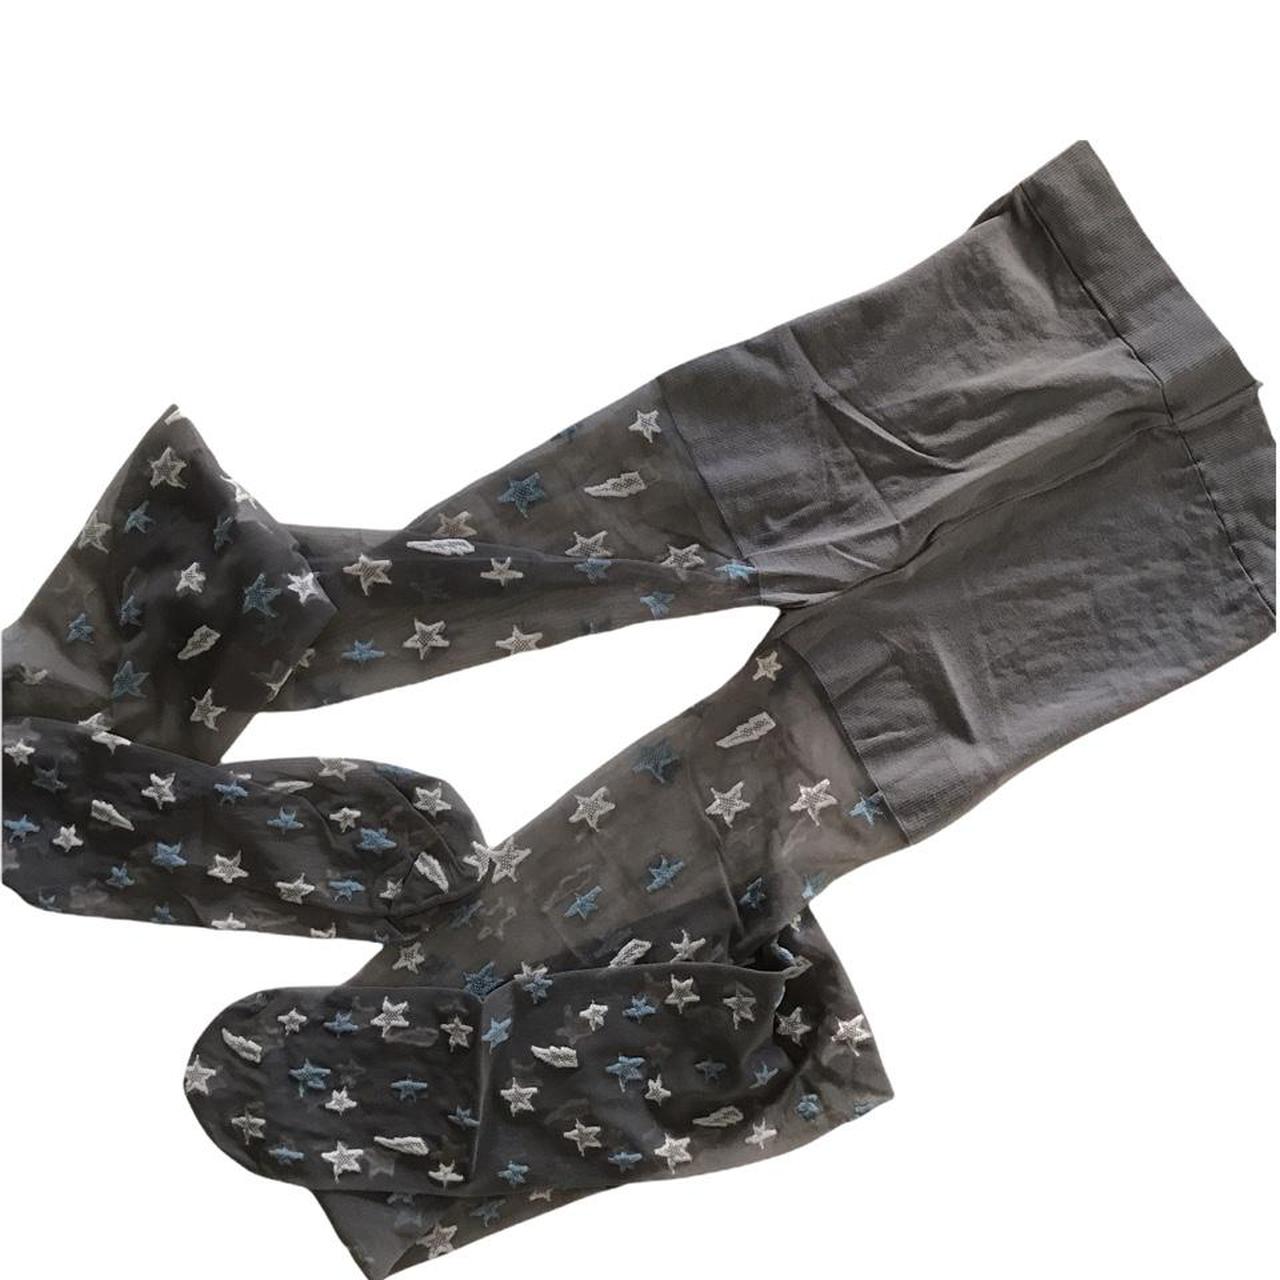 Product Image 2 - Anna Sui star tights
Grey tights